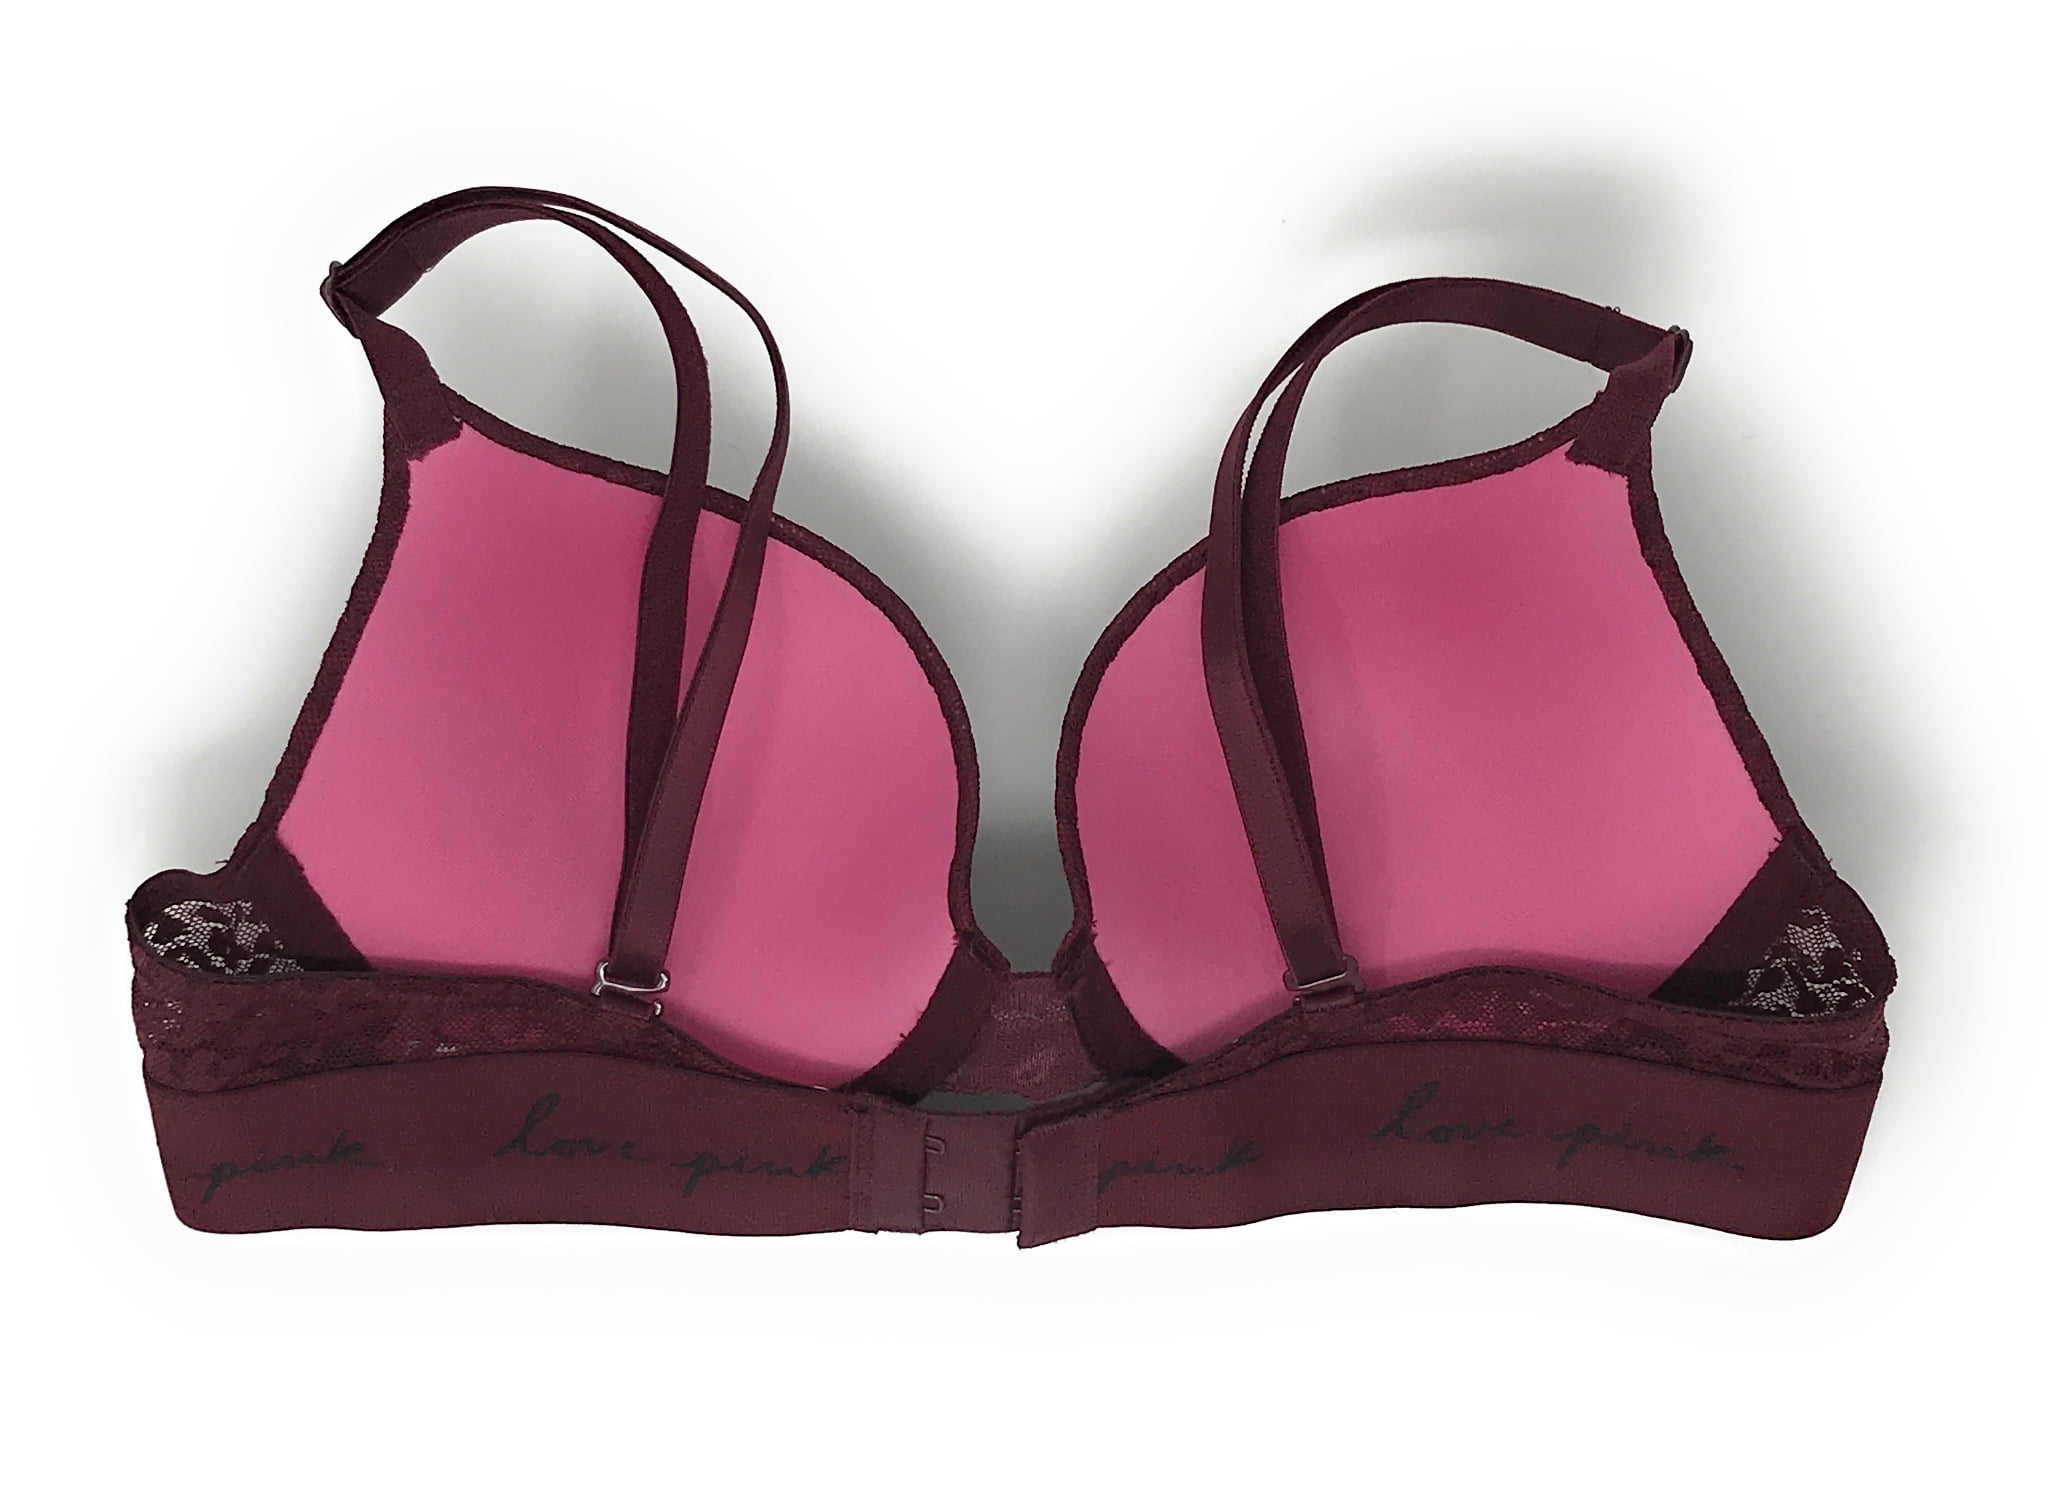 PINK - Victoria's Secret Victoria's Secret Pink Wear Everywhere Push Up Bra  34C Size undefined - $13 - From Holly